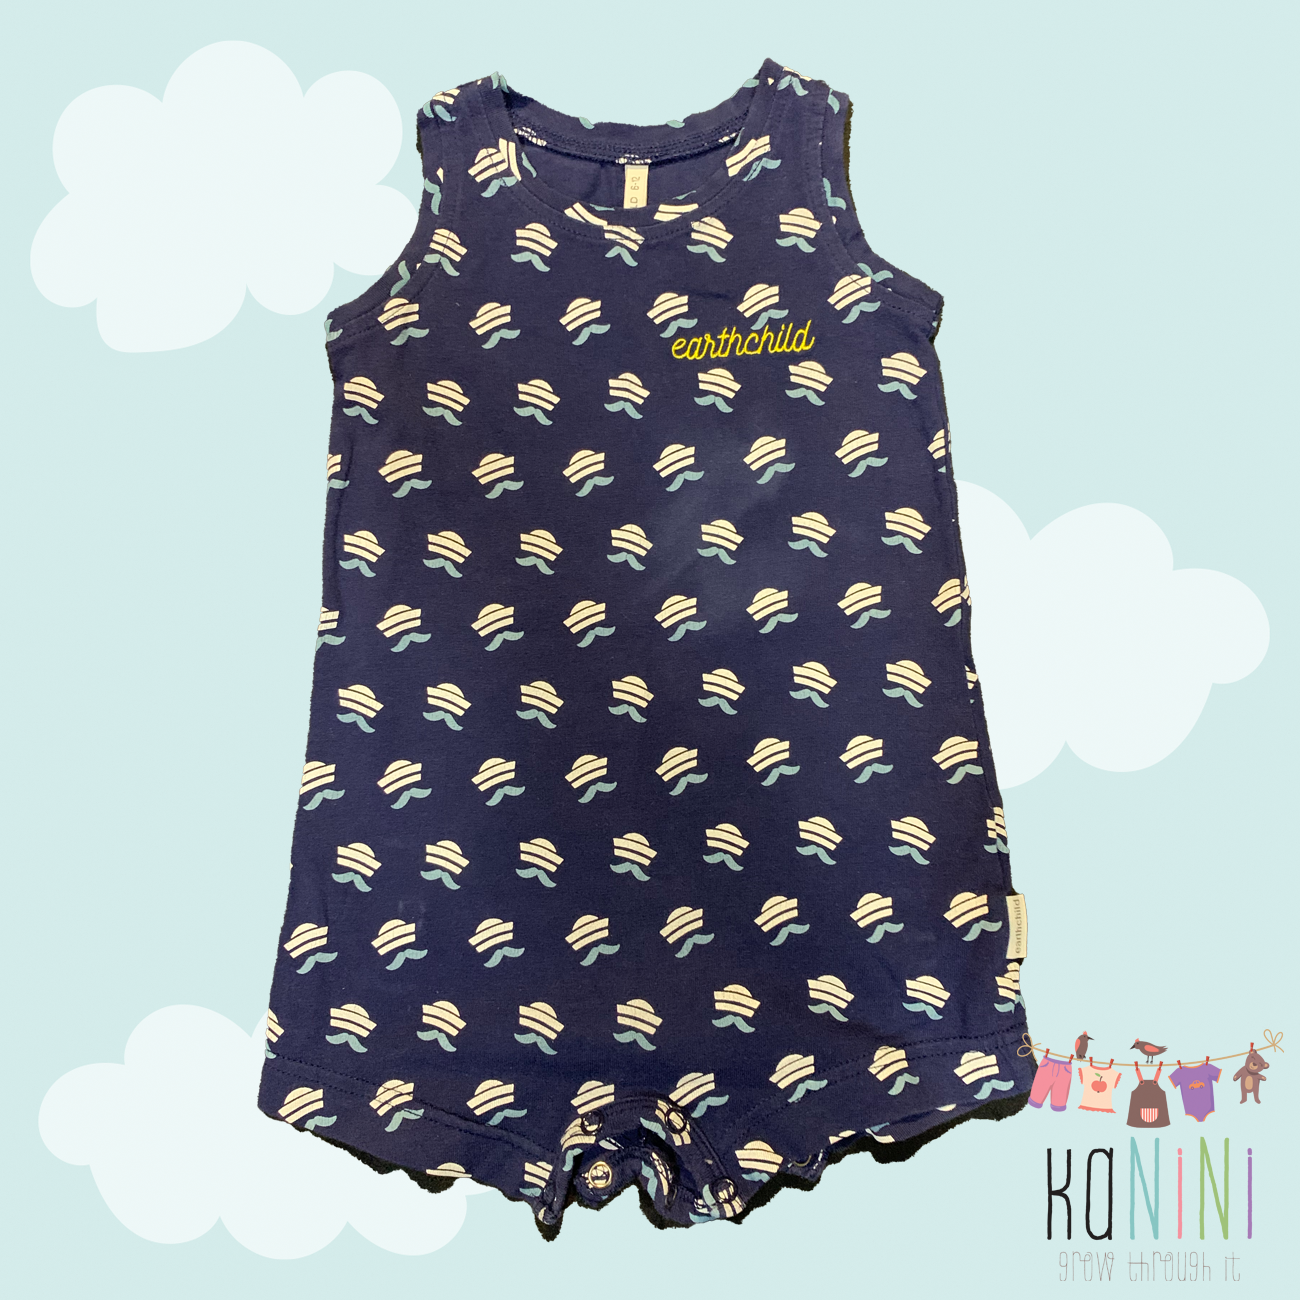 Featured image for “Earthchild 6-12 Months Boys Romper”